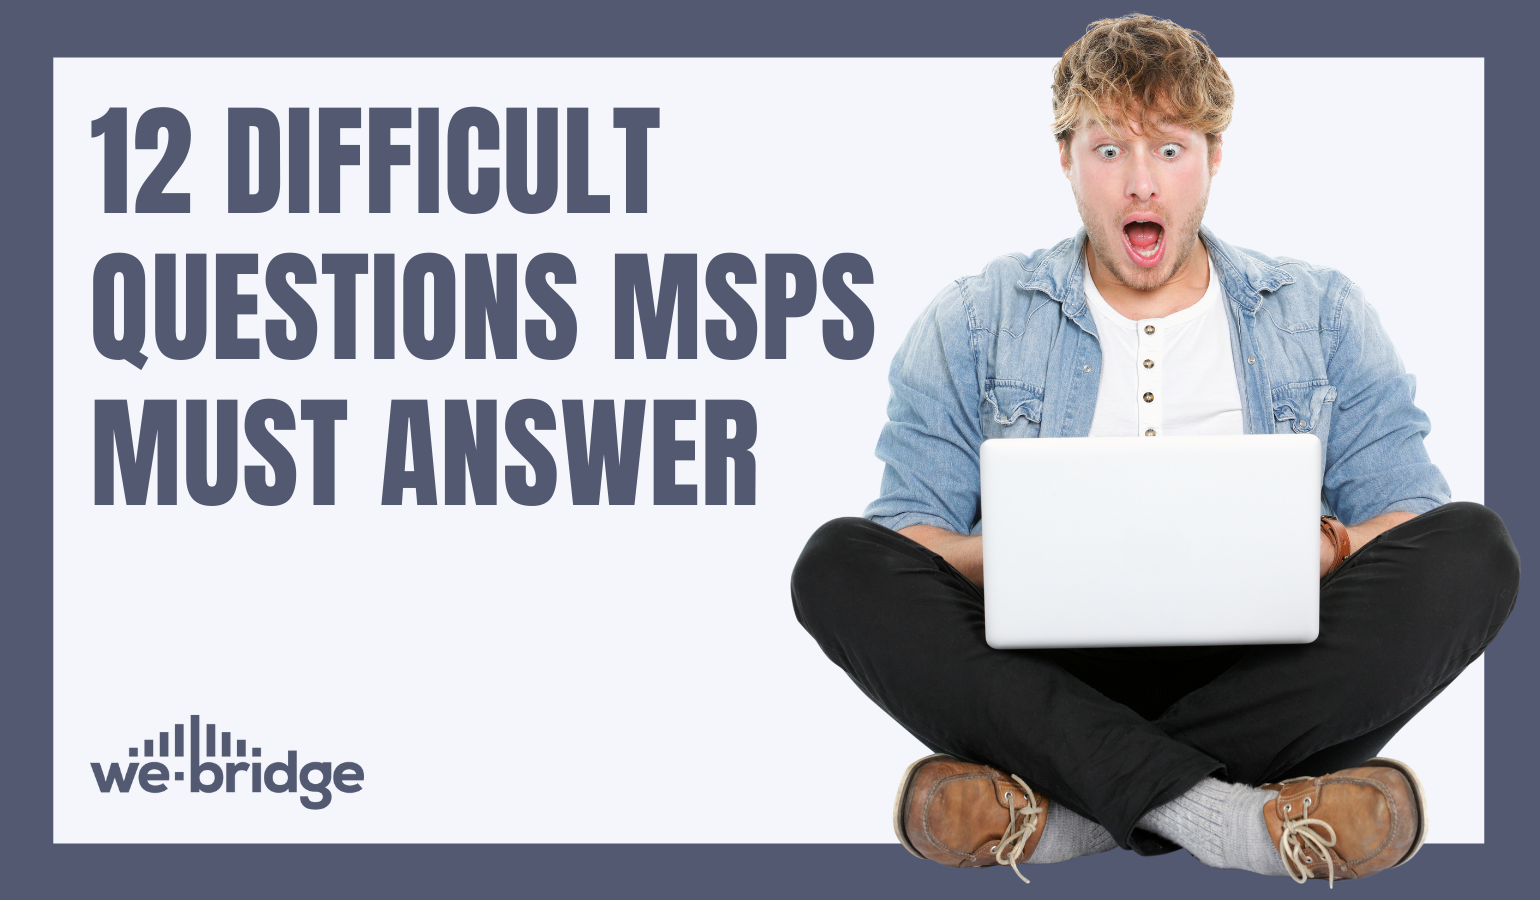 12 Difficult Questions MSPs Must Answer